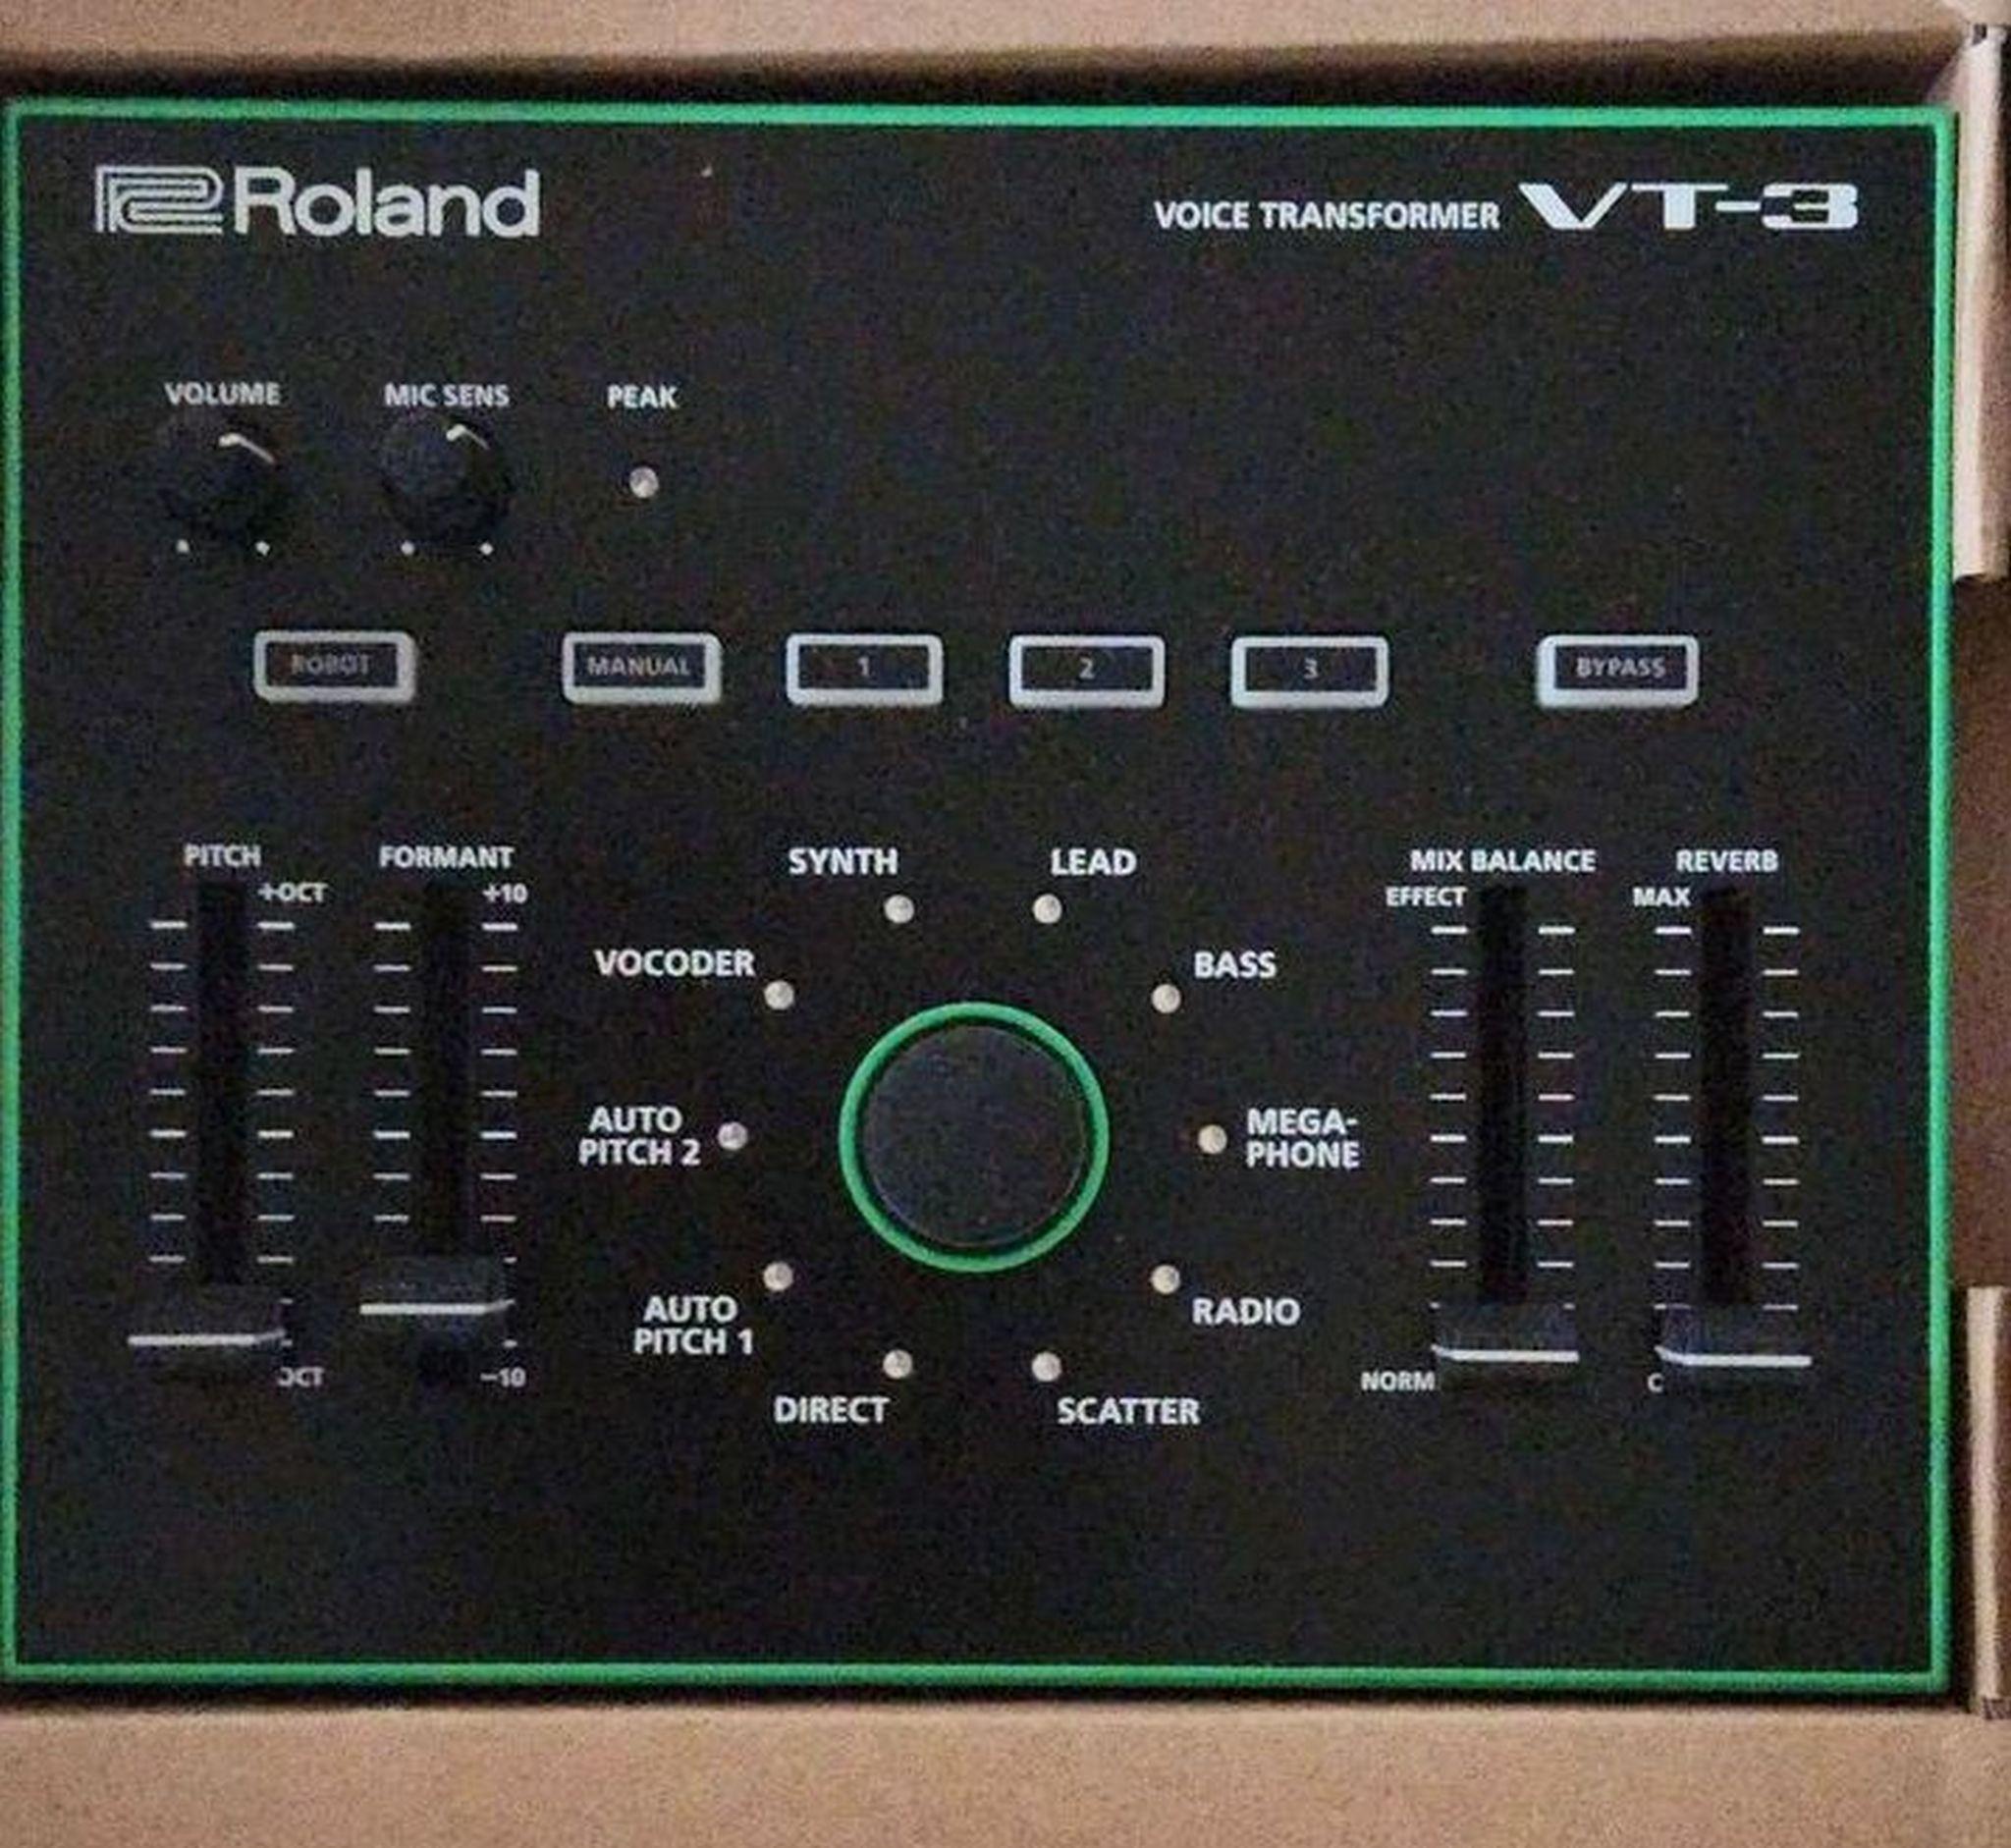 Used Roland VT-3 Voice Transformer - Sweetwater's Gear Exchange